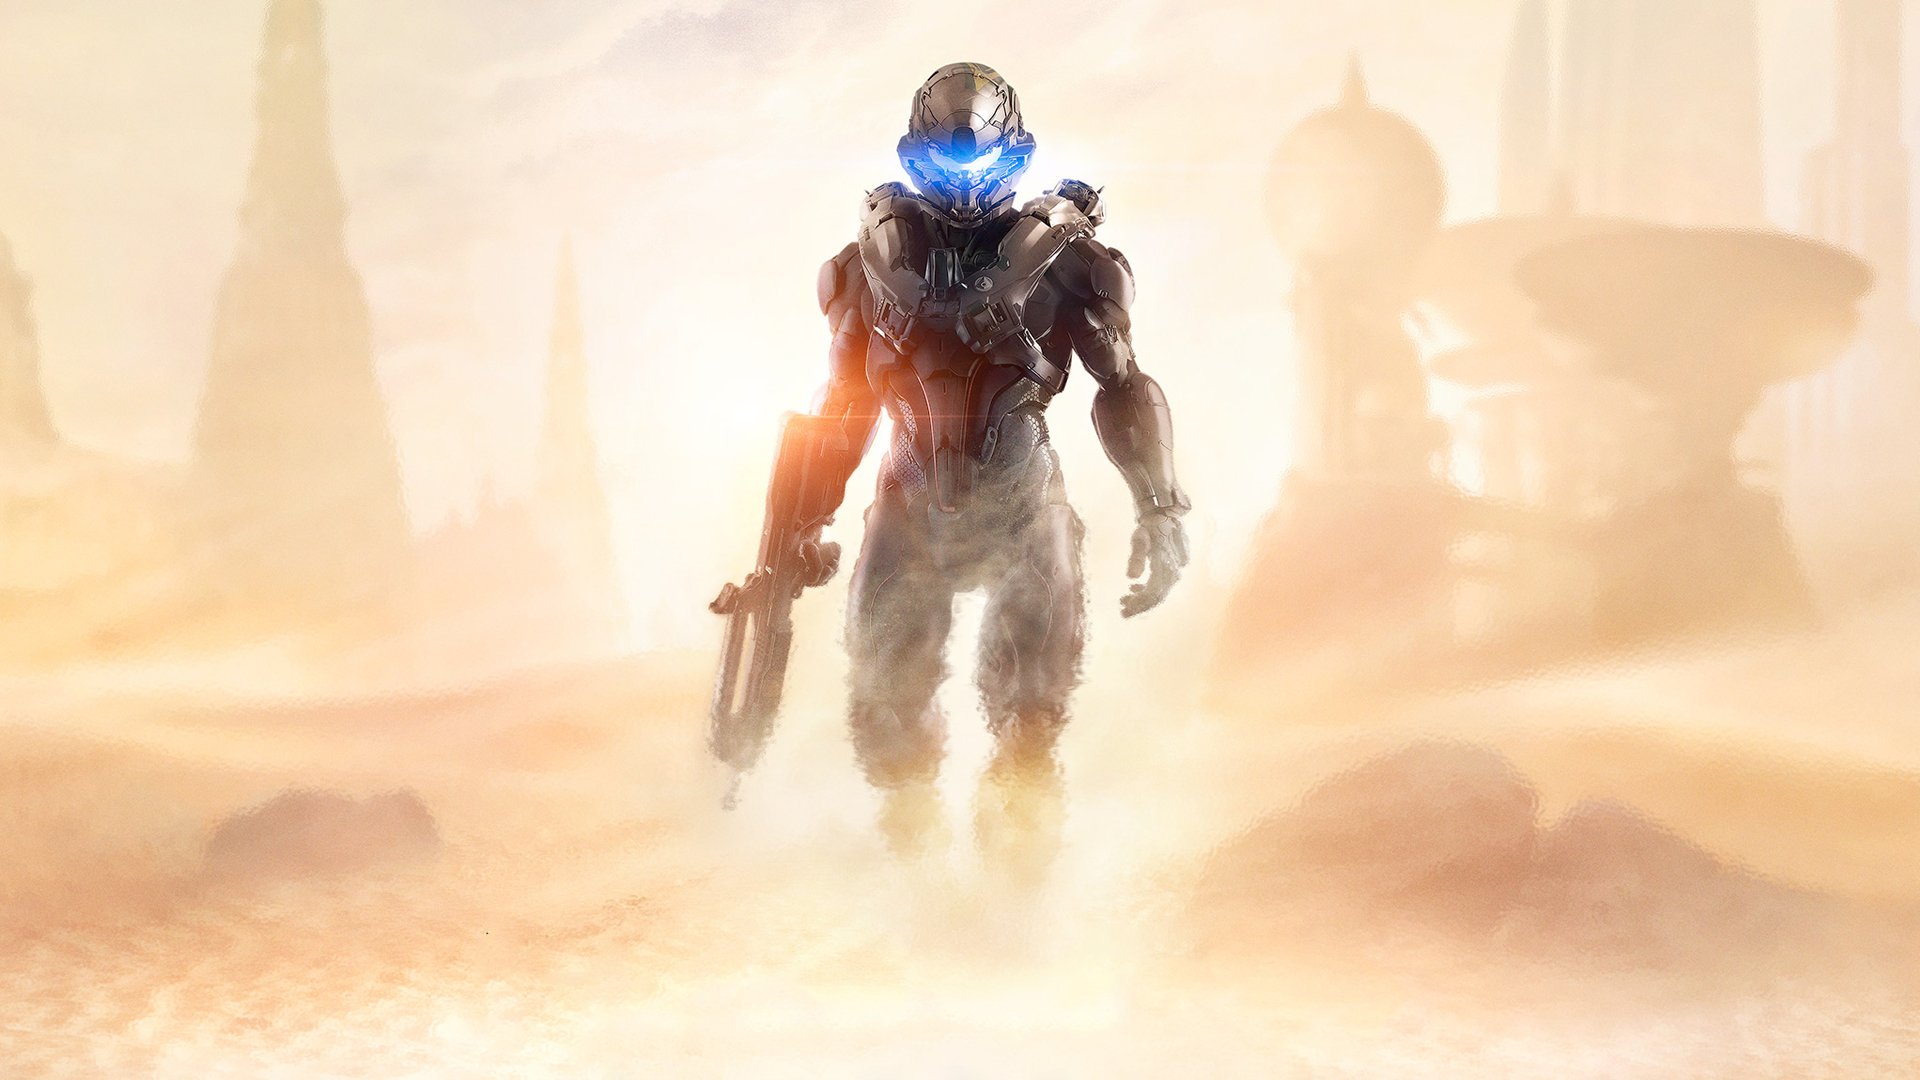 Video Game Halo 5 Guardians 1920x1080